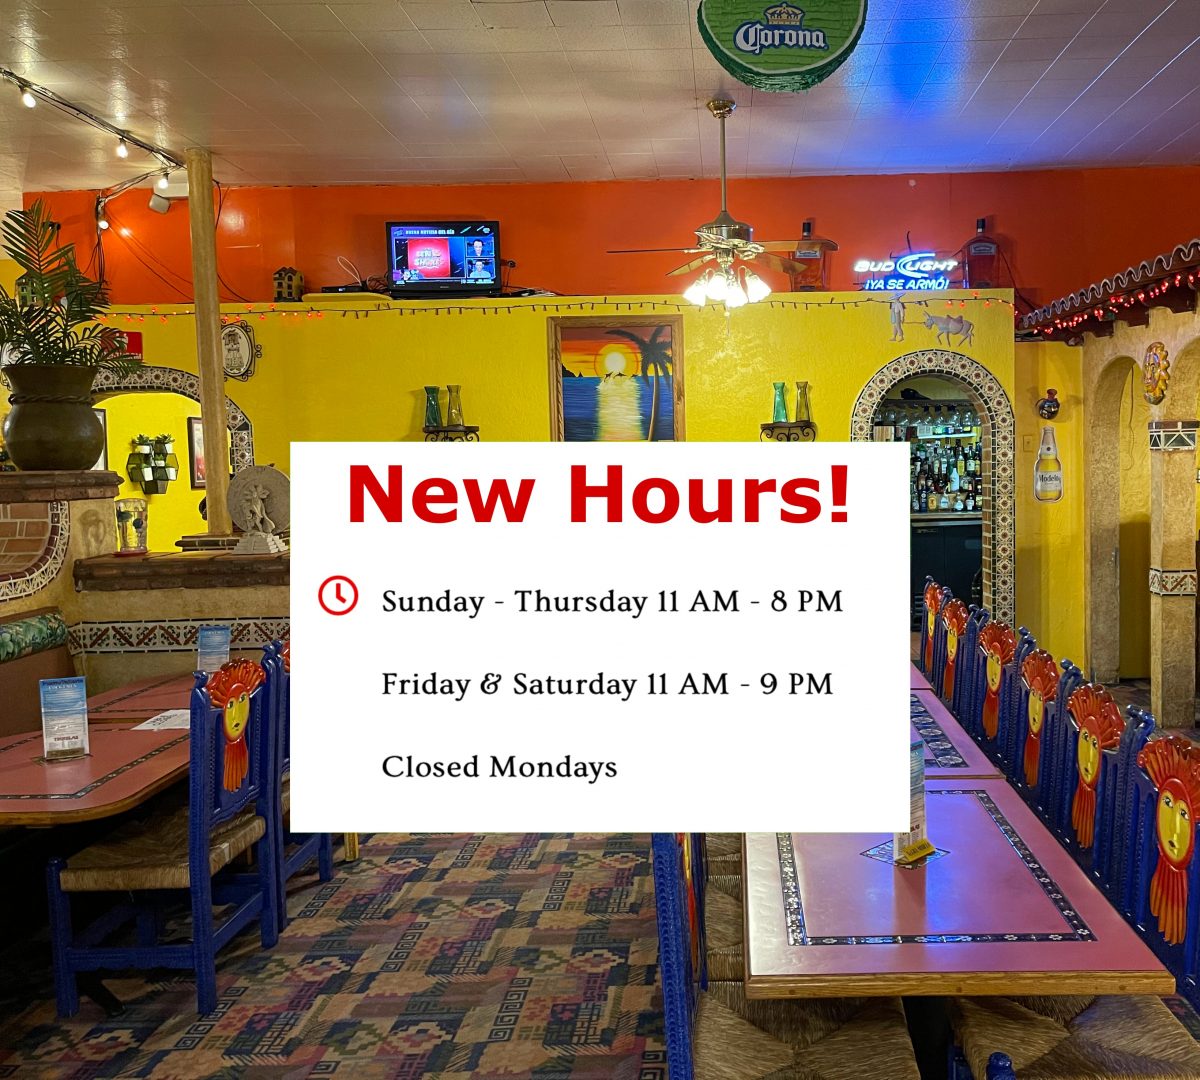 New Mexican restaurant hours